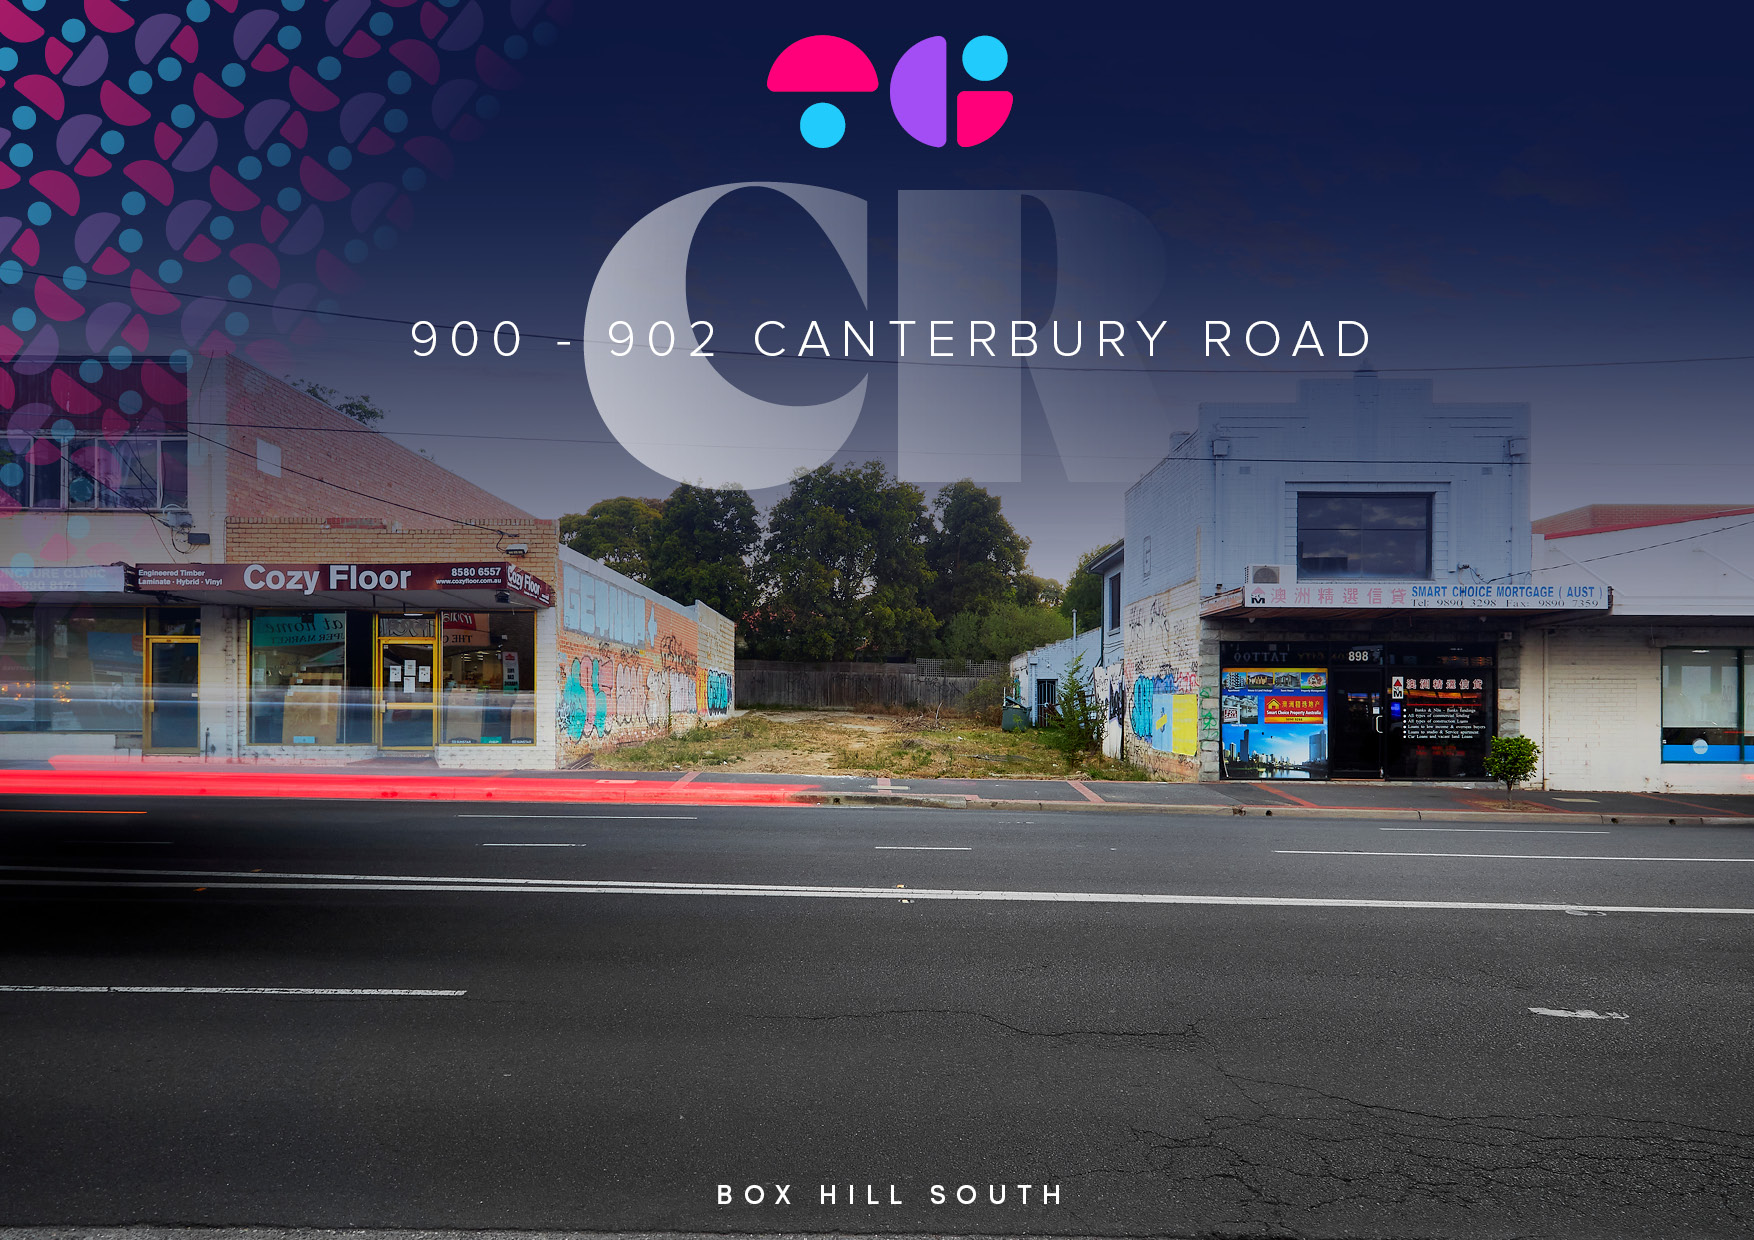 Sale 900-902 Canterbury Road Box Hill Development Commercial Real Estate TCI South